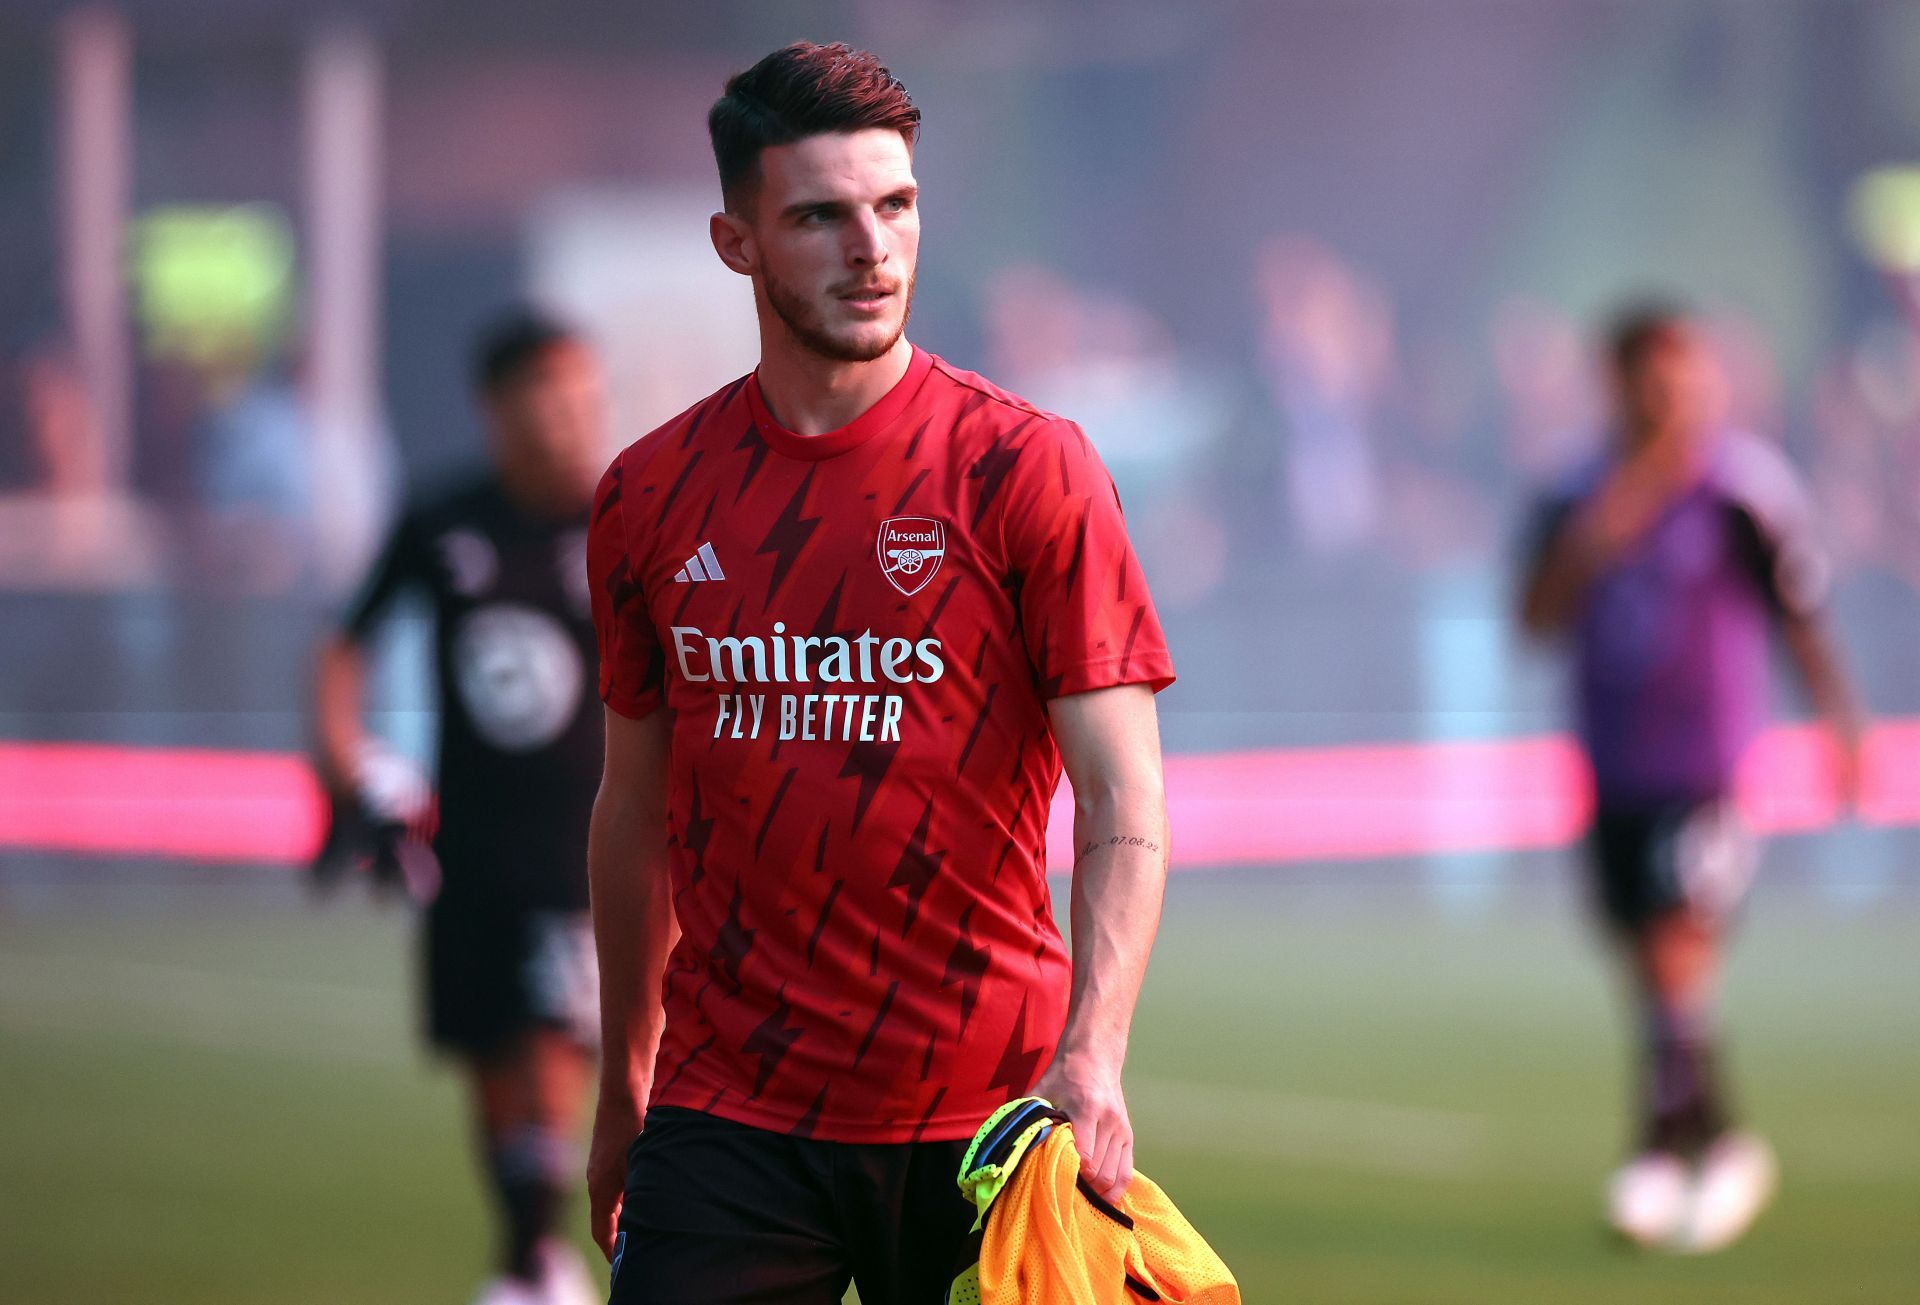 Declan Rice arrived at the Emirates this summer.